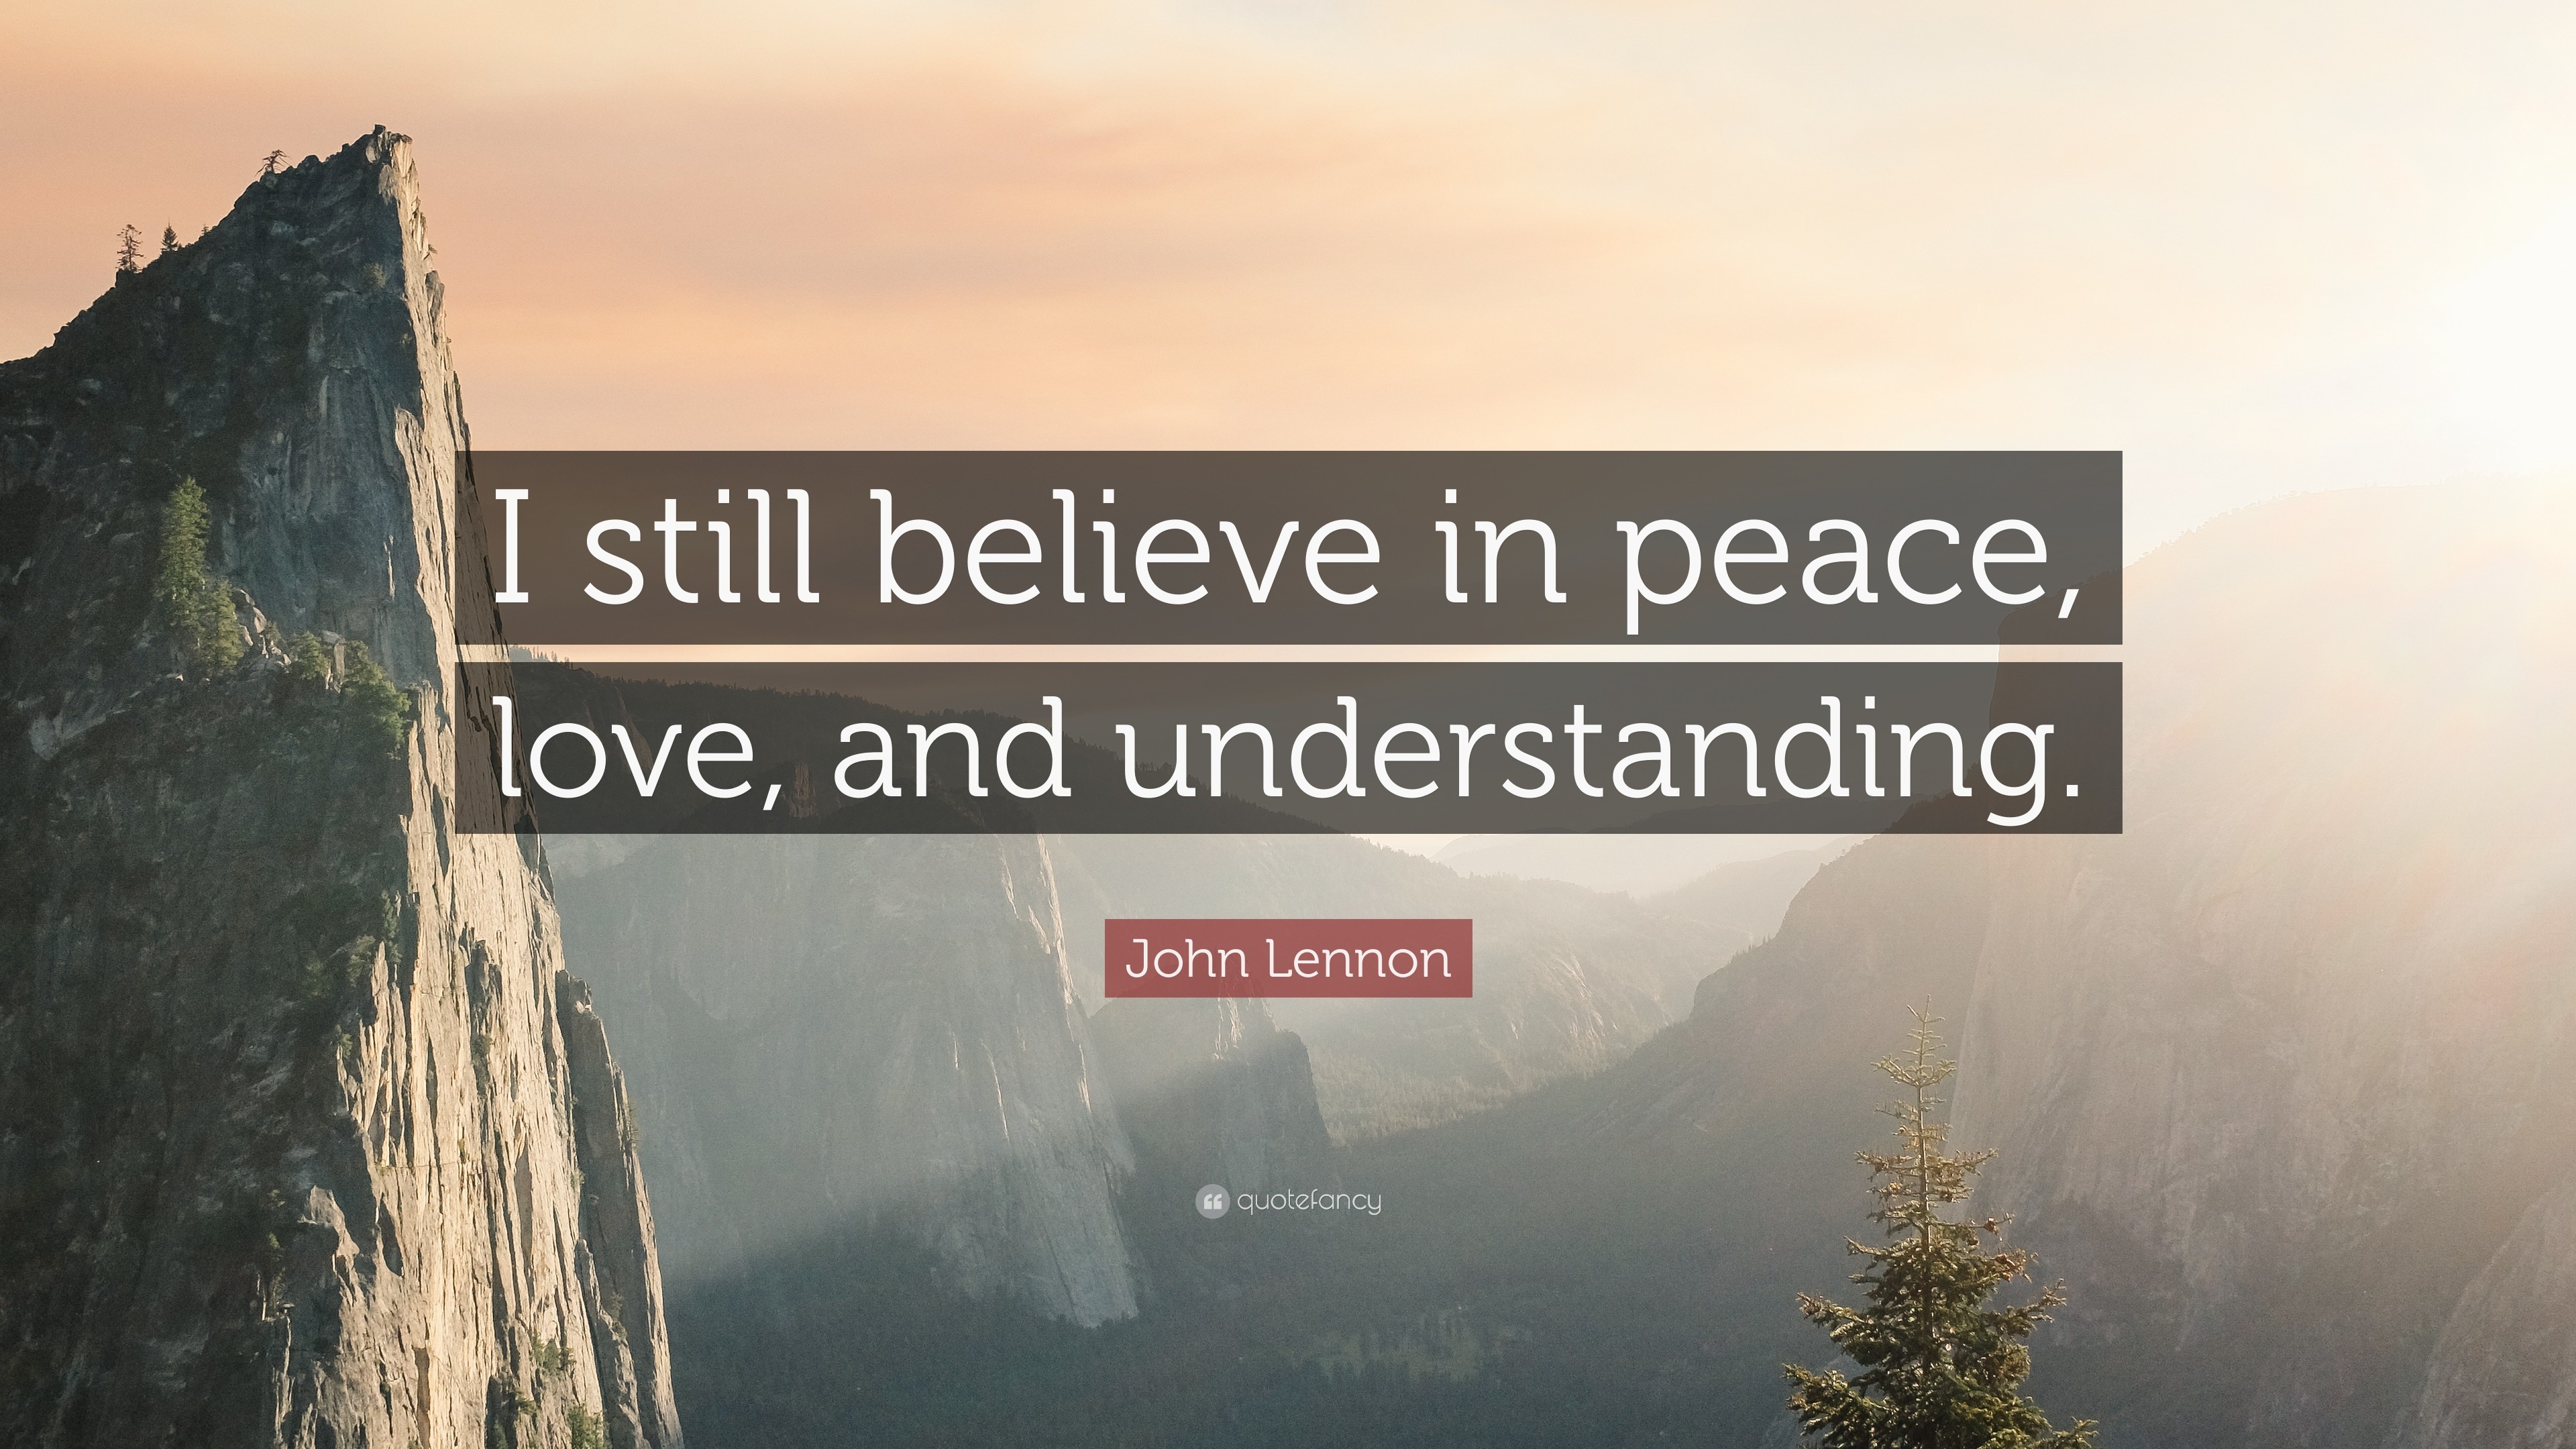 3840x2160 John Lennon Quote: “I still believe in peace, love, and understanding.